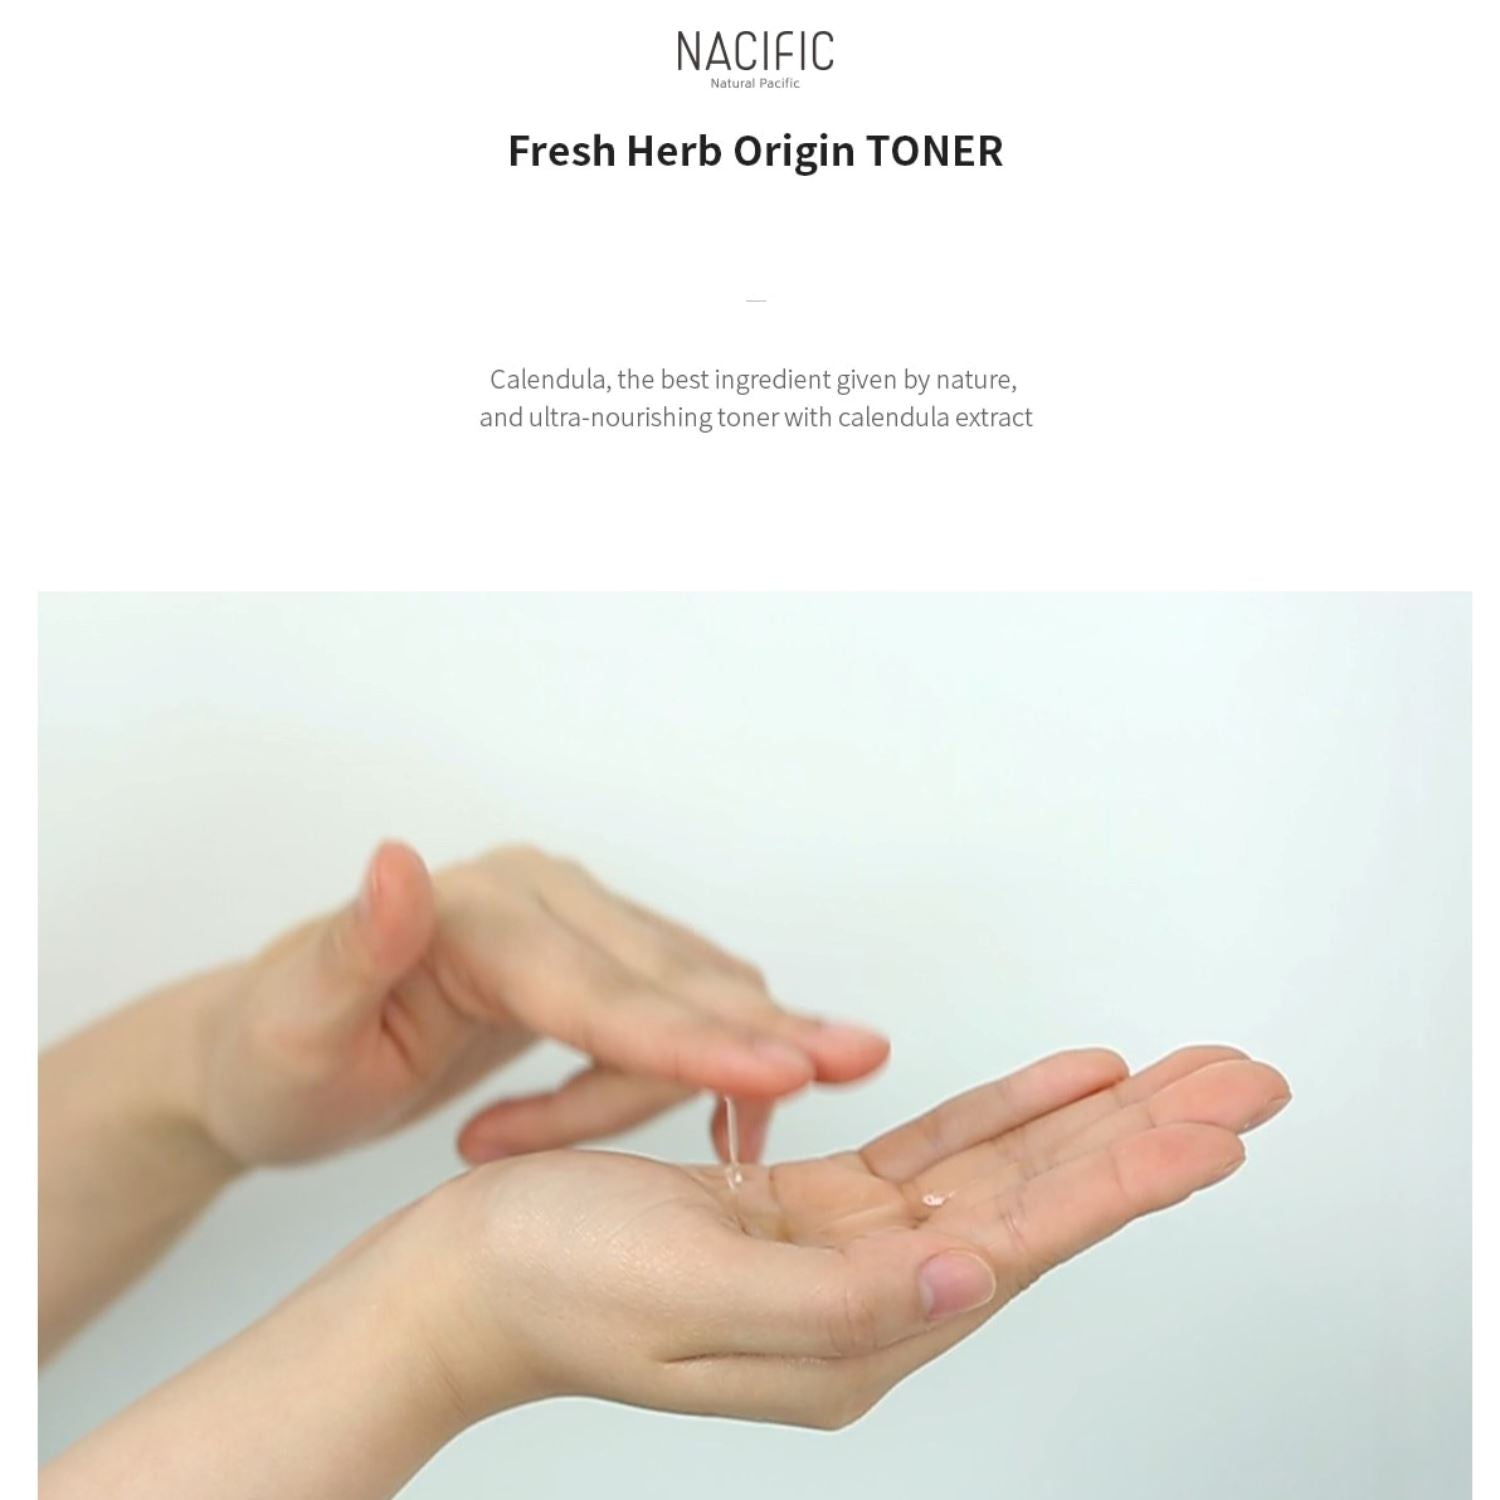 Nacific Fresh Herb Origin Toner 150ml, at Orion Beauty. Nacific Official Sole Authorized Retailer in Sri Lanka!